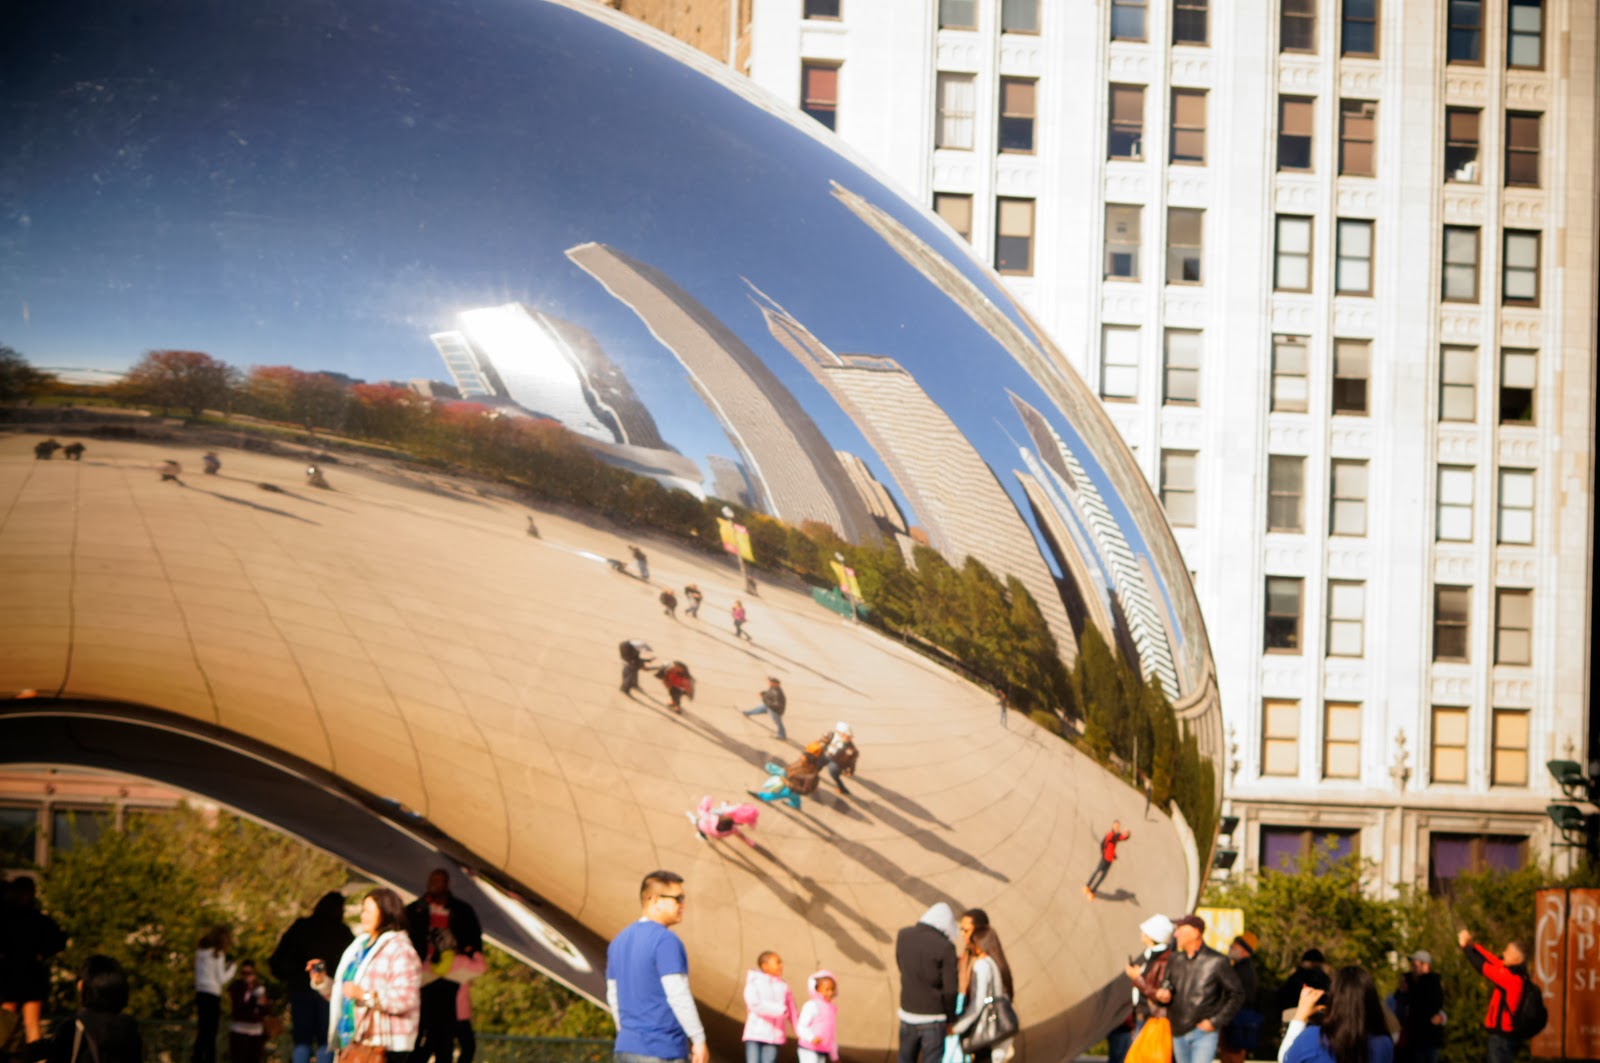 [Cloud-gate-anish-kapoor-free-pictures-1%2520%25289%2529%255B3%255D.jpg]